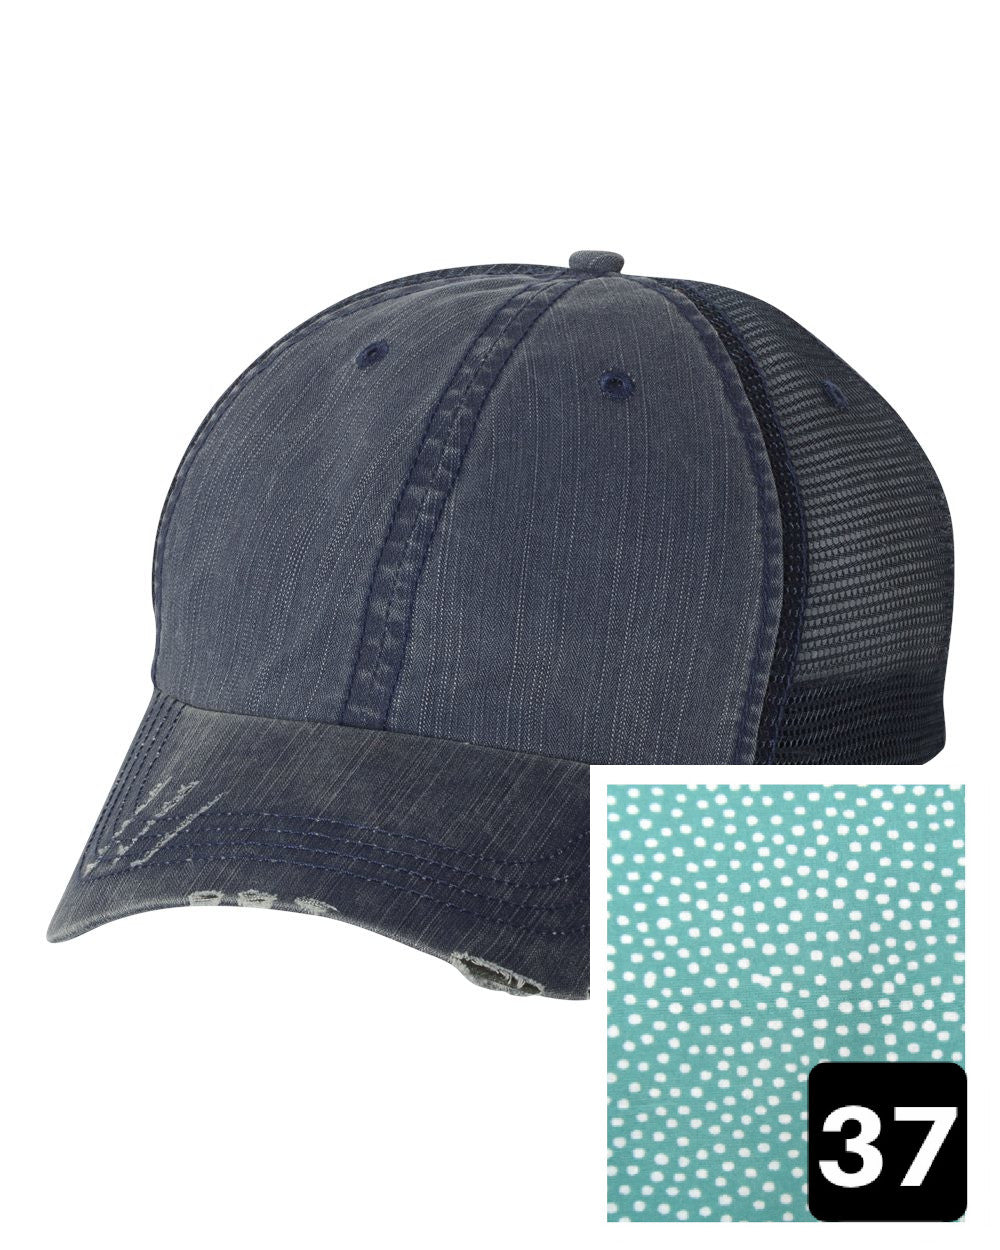 Maine Hat | Navy Distressed Trucker Cap | Many Fabric Choices